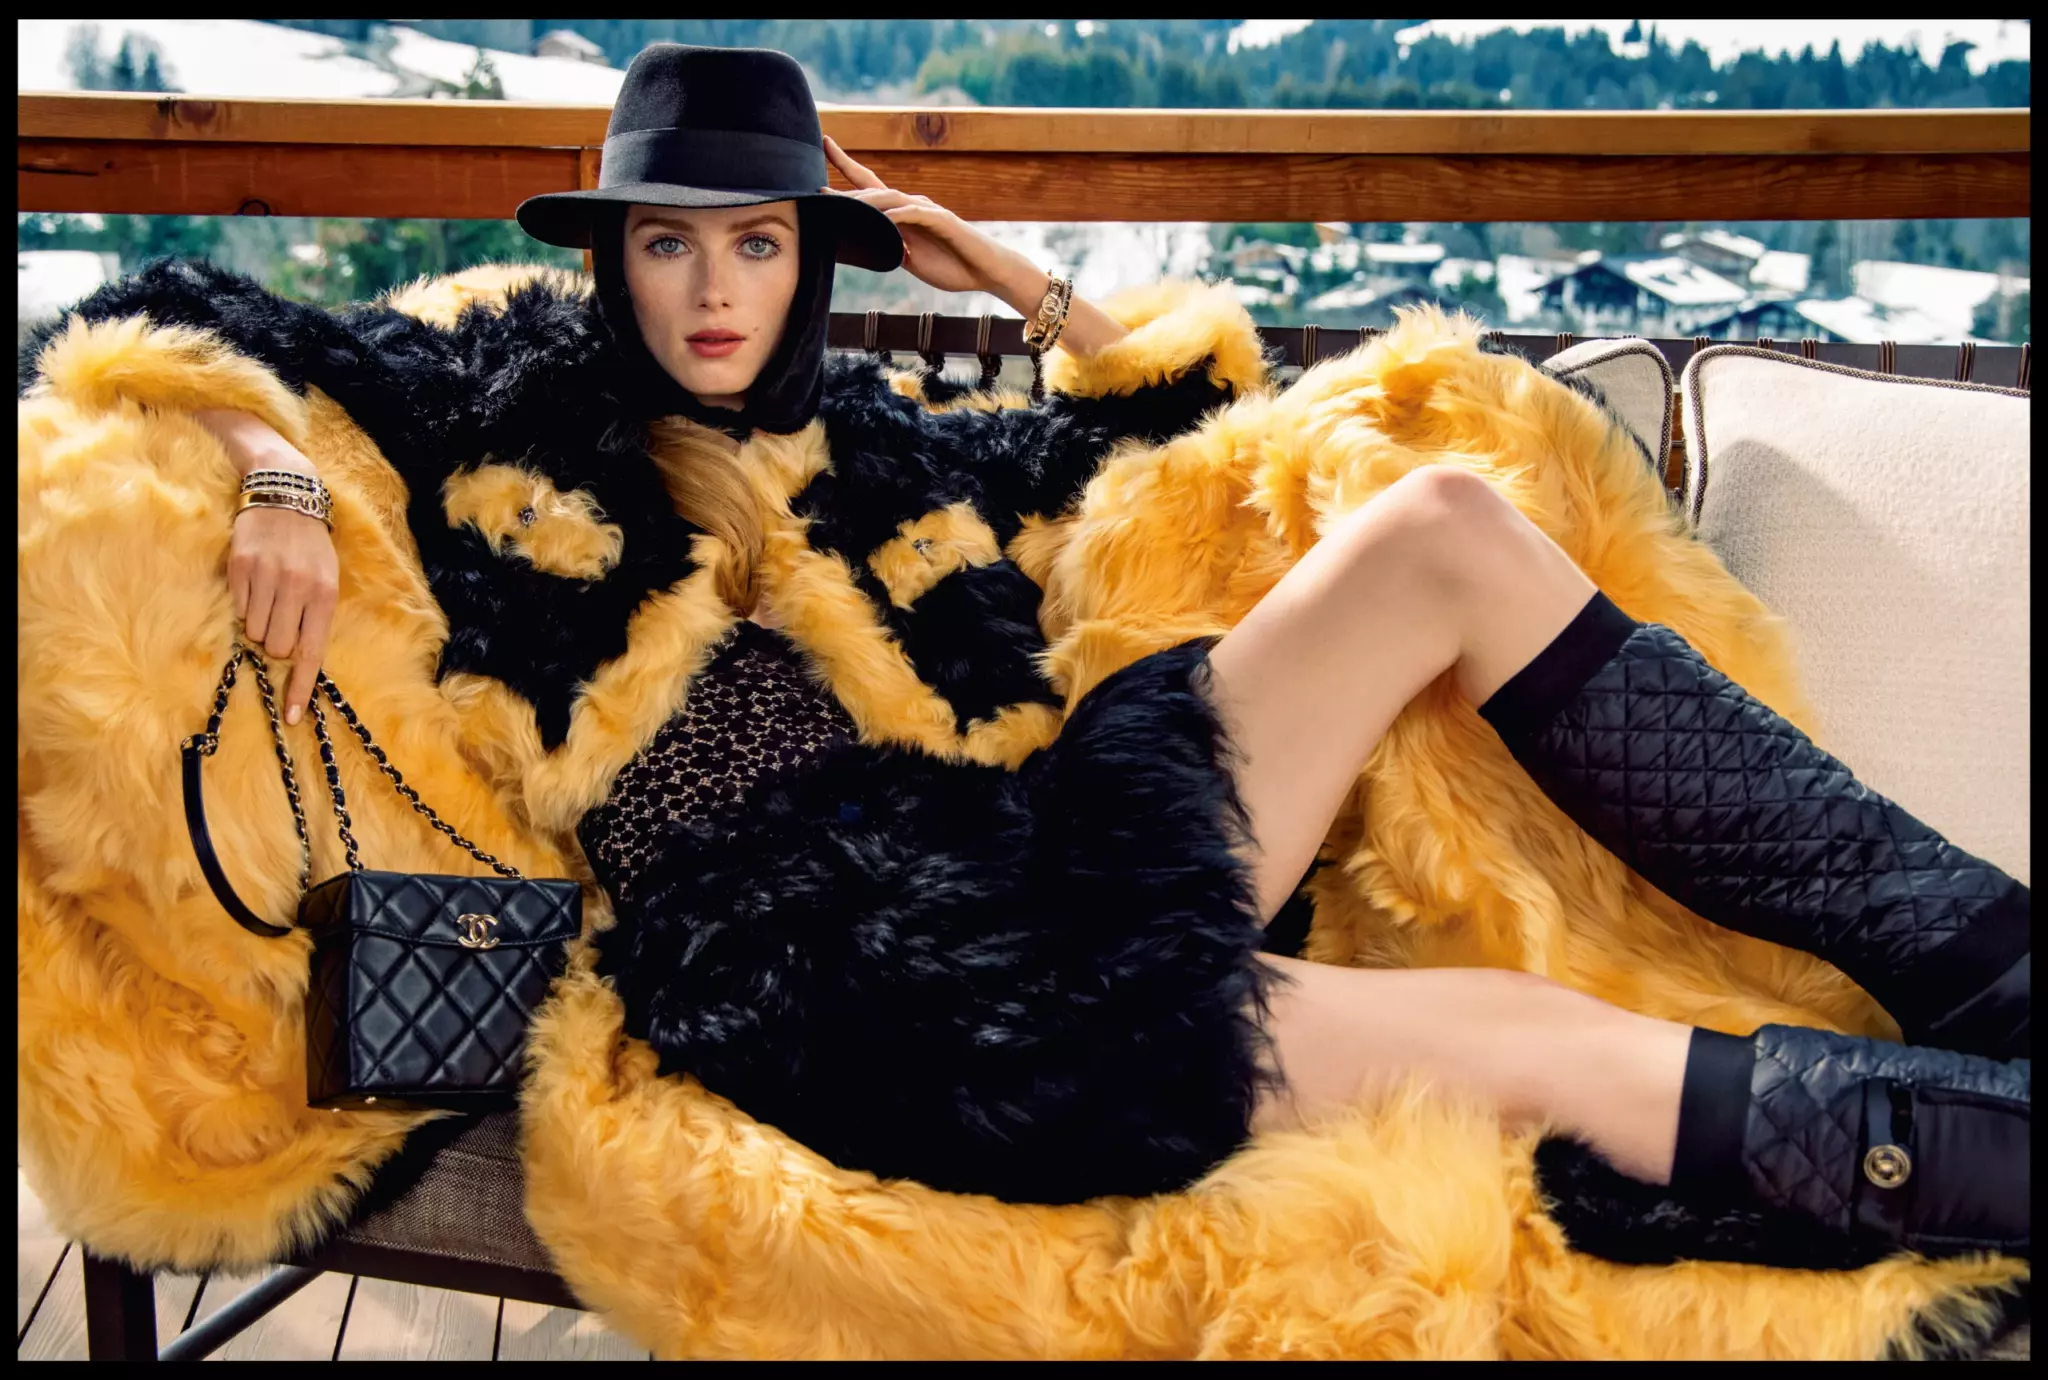 Fall-Winter 21/22 trends that fashionistas will adopt this season. Focus on iconic Chanel, Baum und Pferdgarten, By Malina and By Malene Birger.